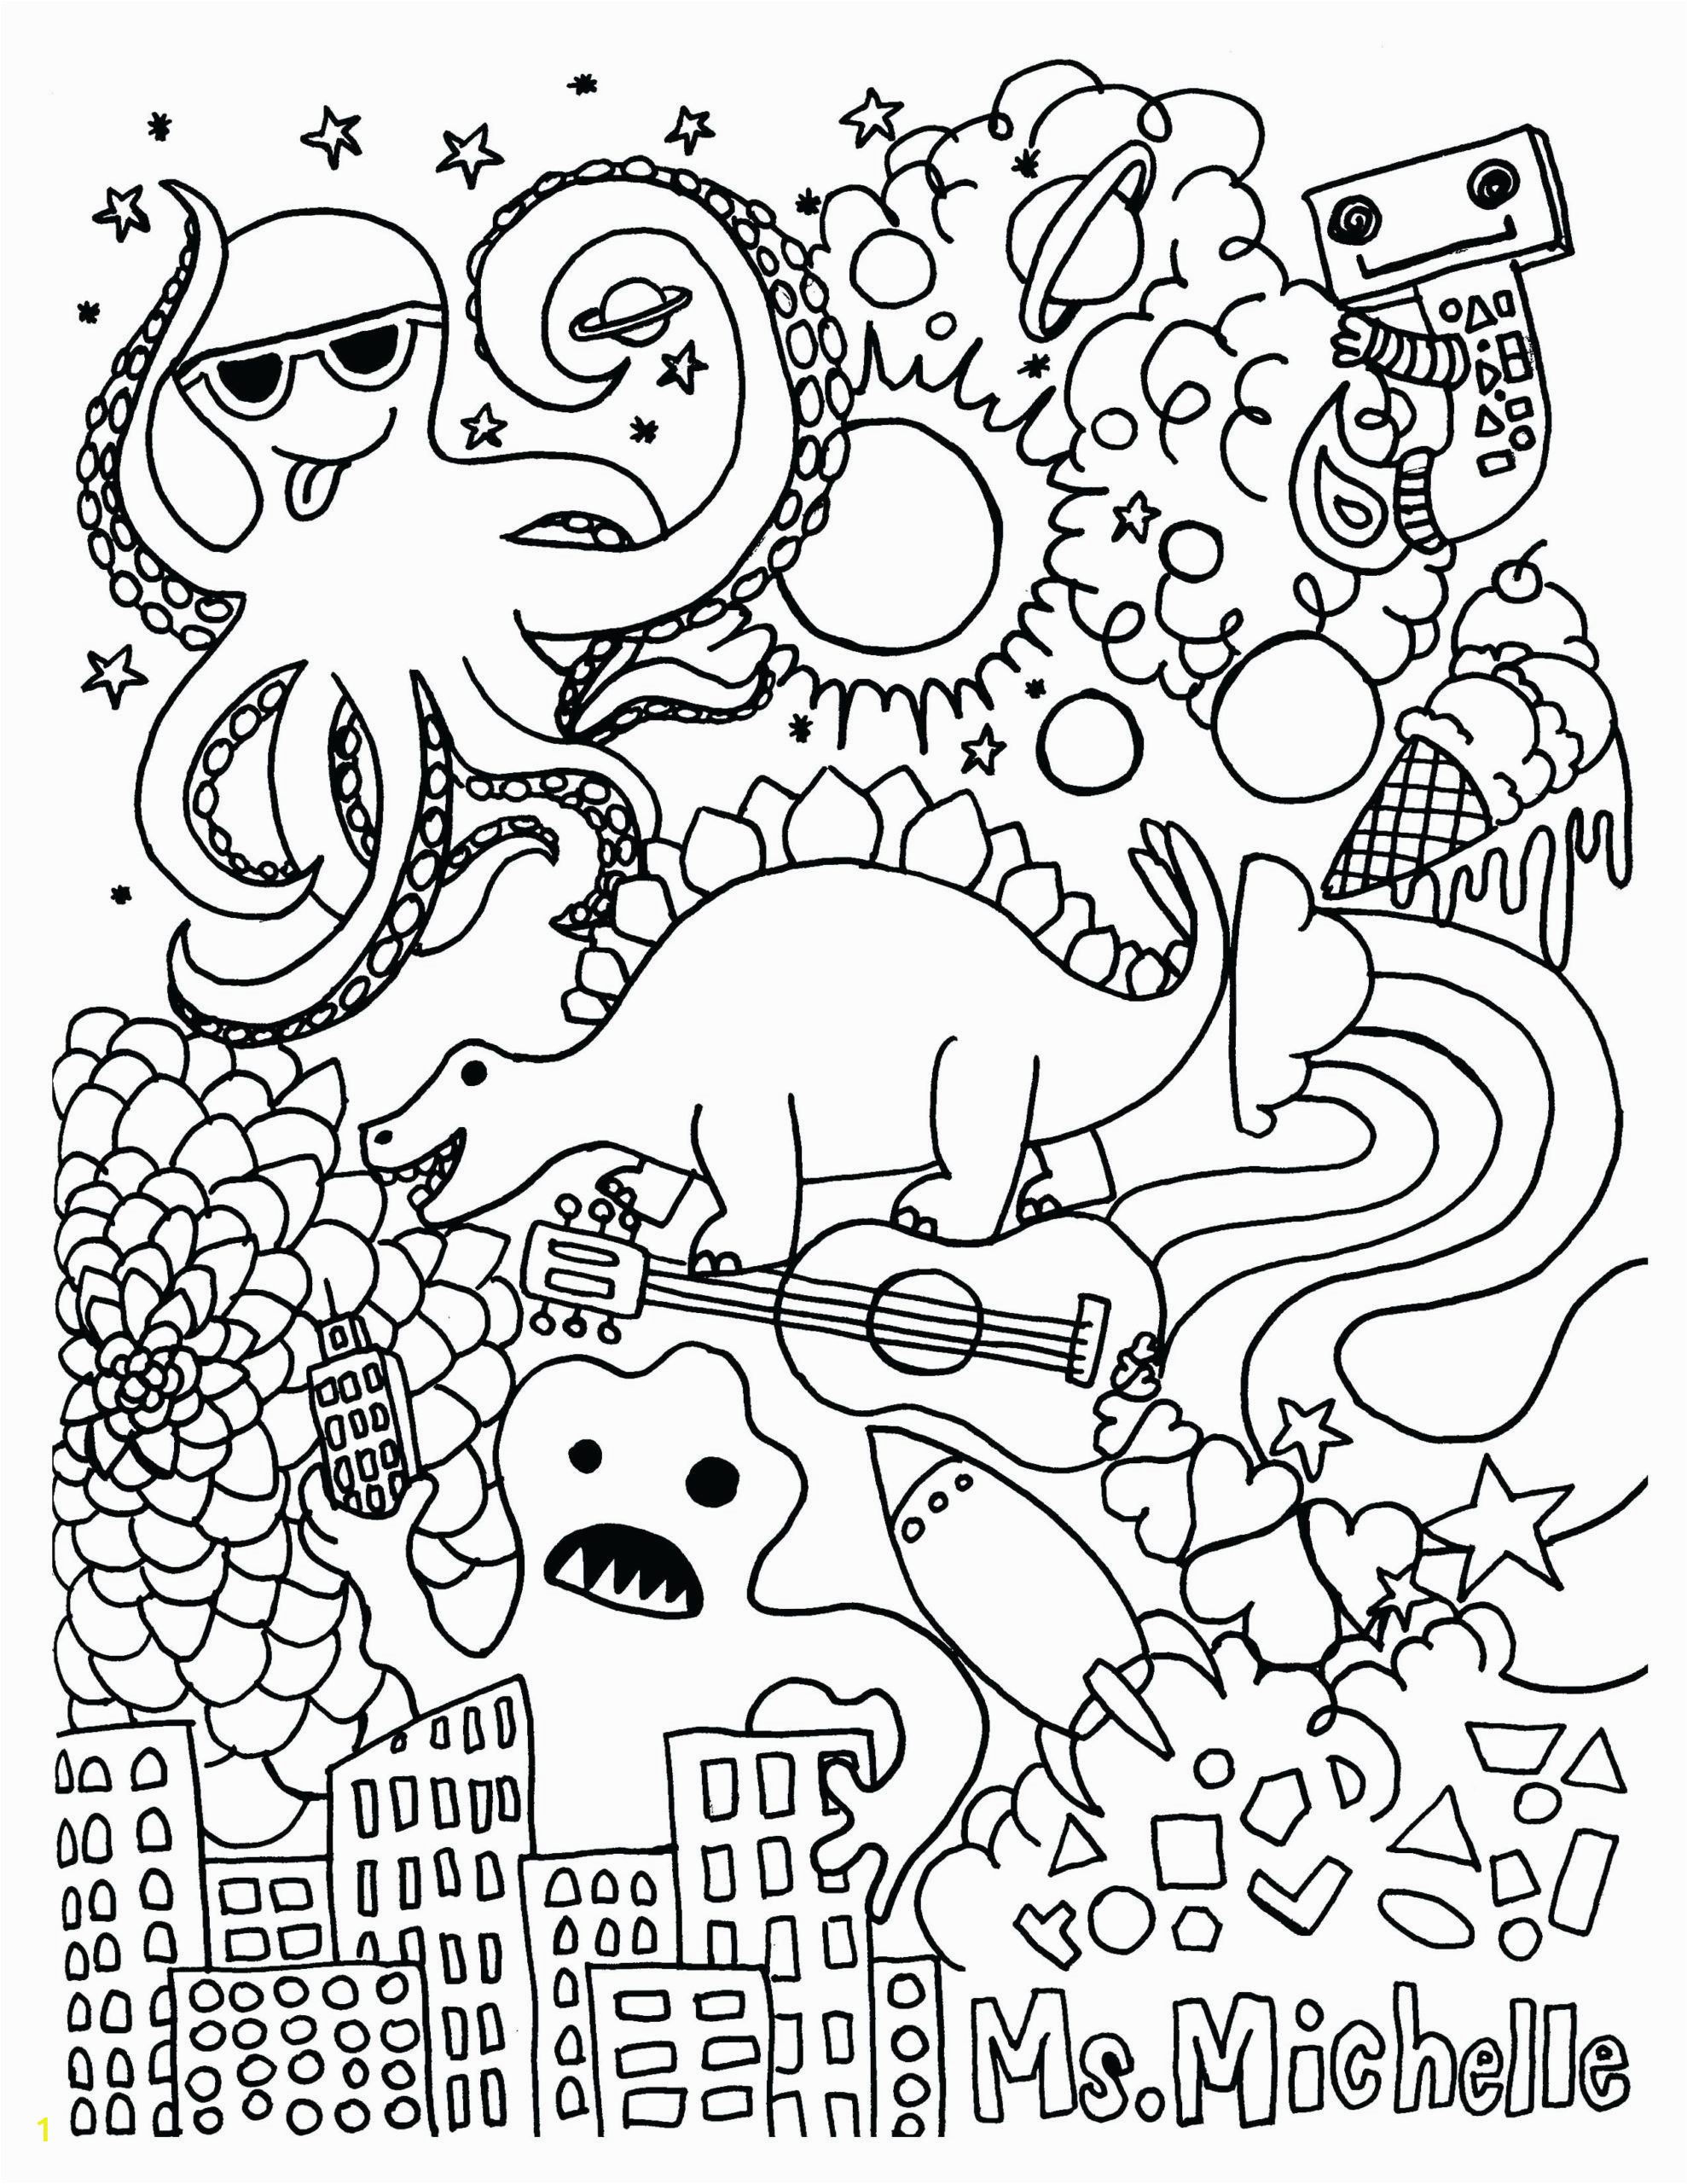 Color by Number Halloween Coloring Sheets 6 Halloween Drawing Activity Worksheet Printable In 2020